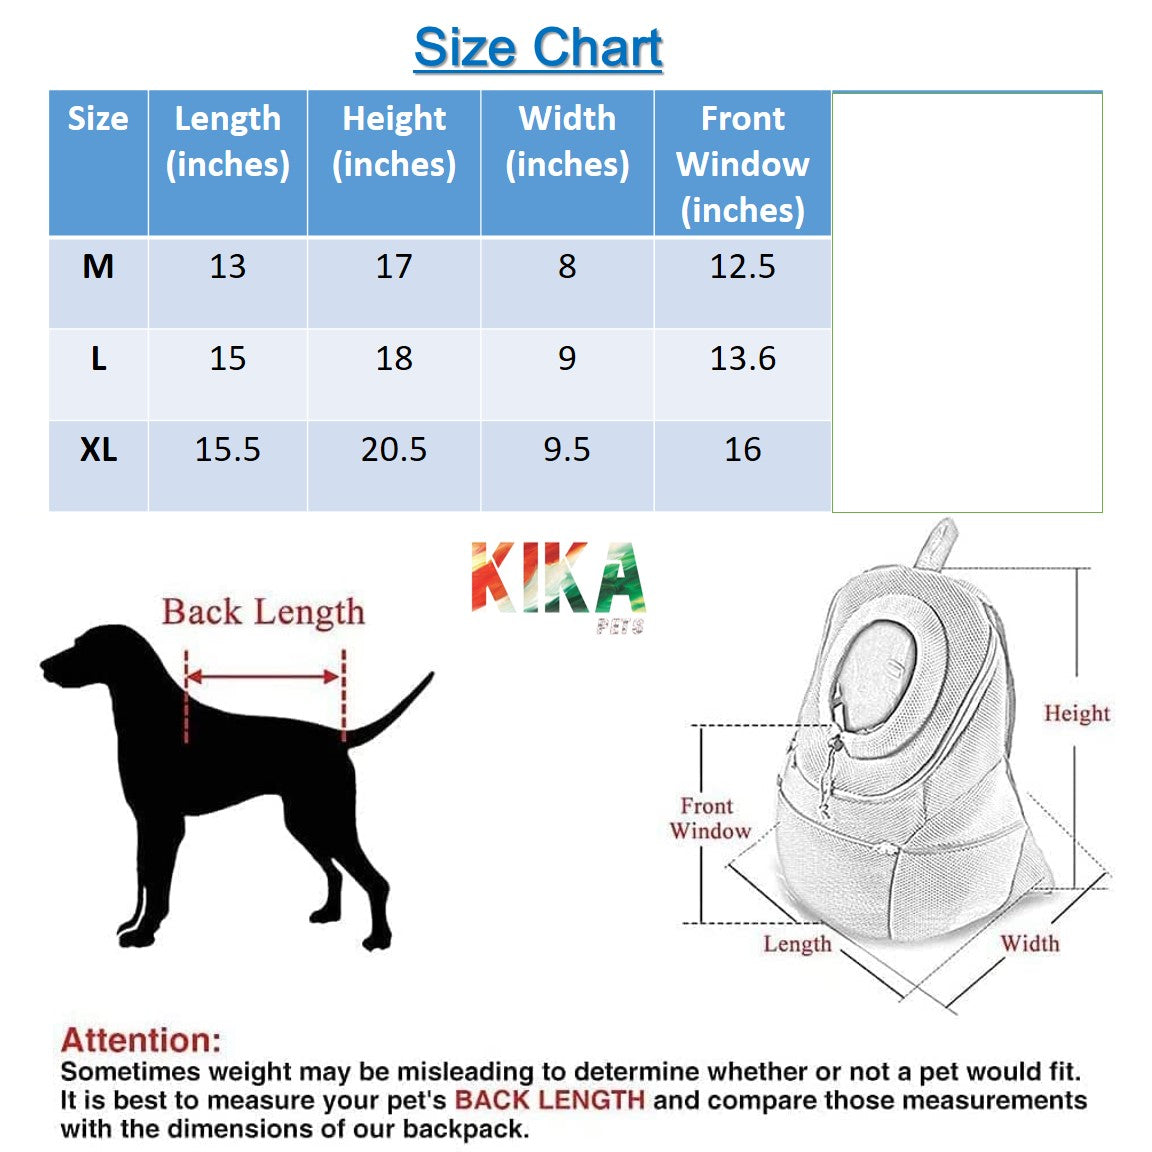 KIKA Pets Head Out Dog Backpack Carrier, size chart - how to select the correct size for your pet dog puppy